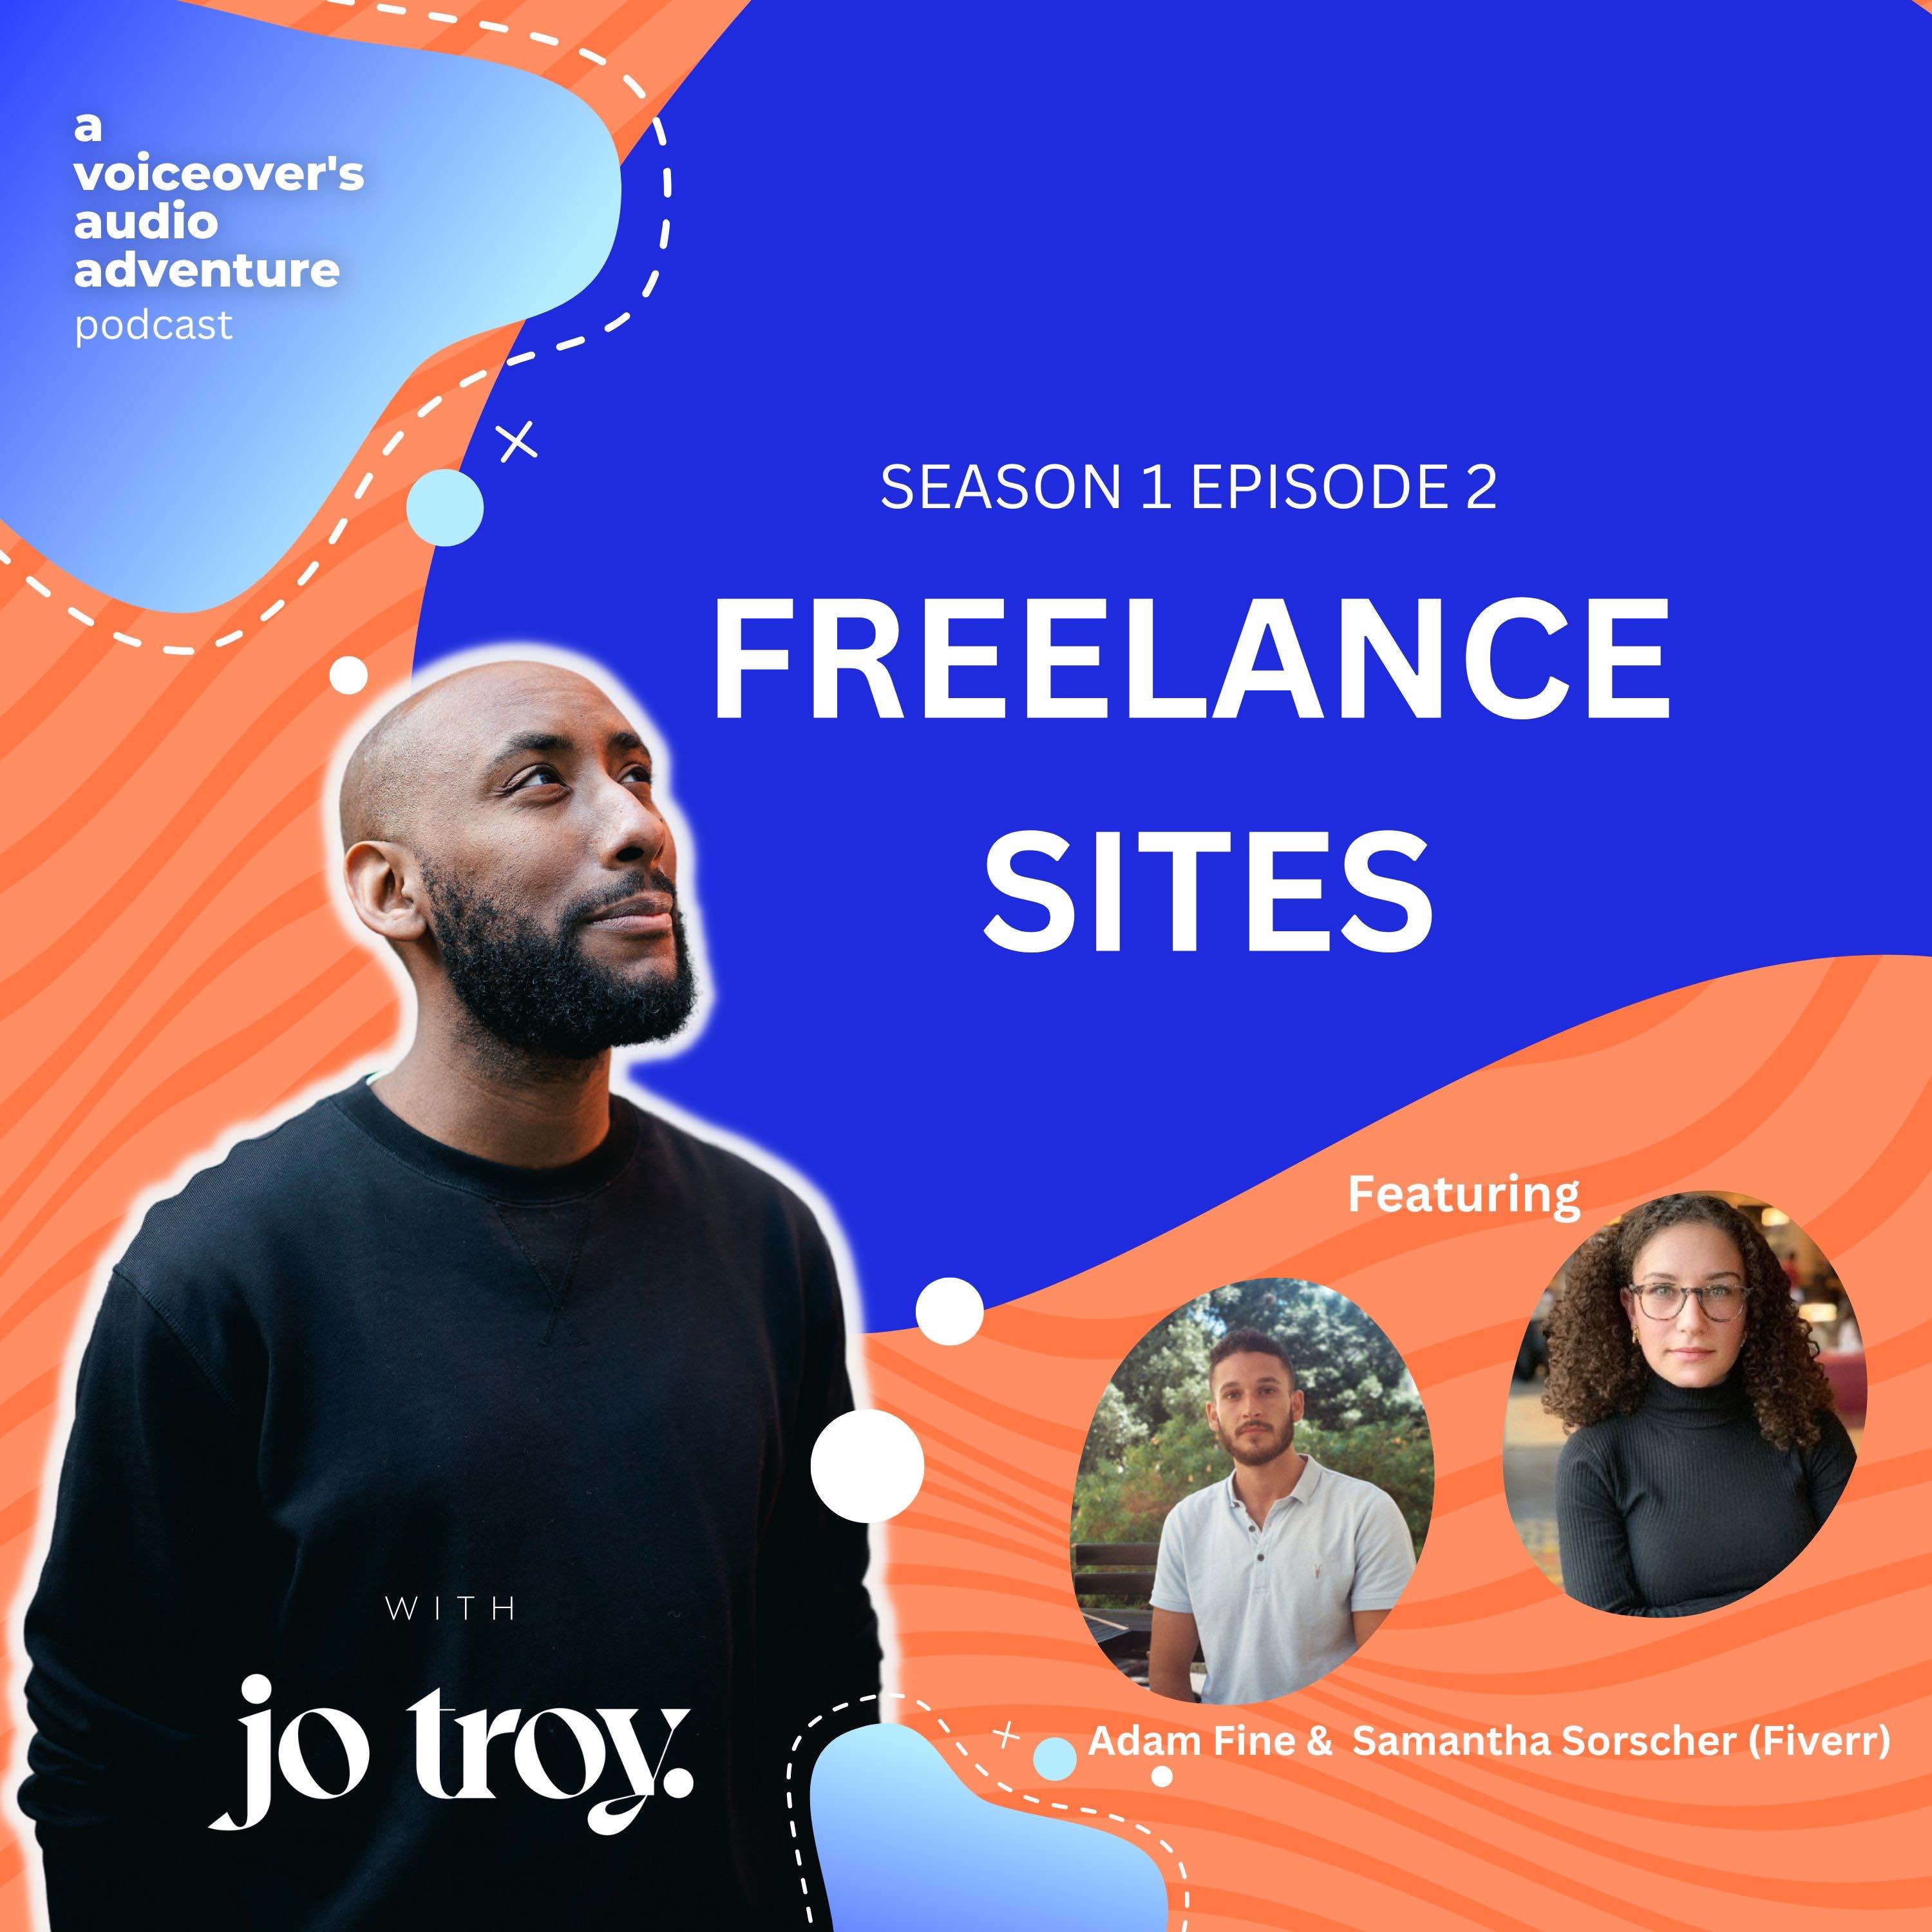 Voiceovers and Freelance Sites | S1 E2